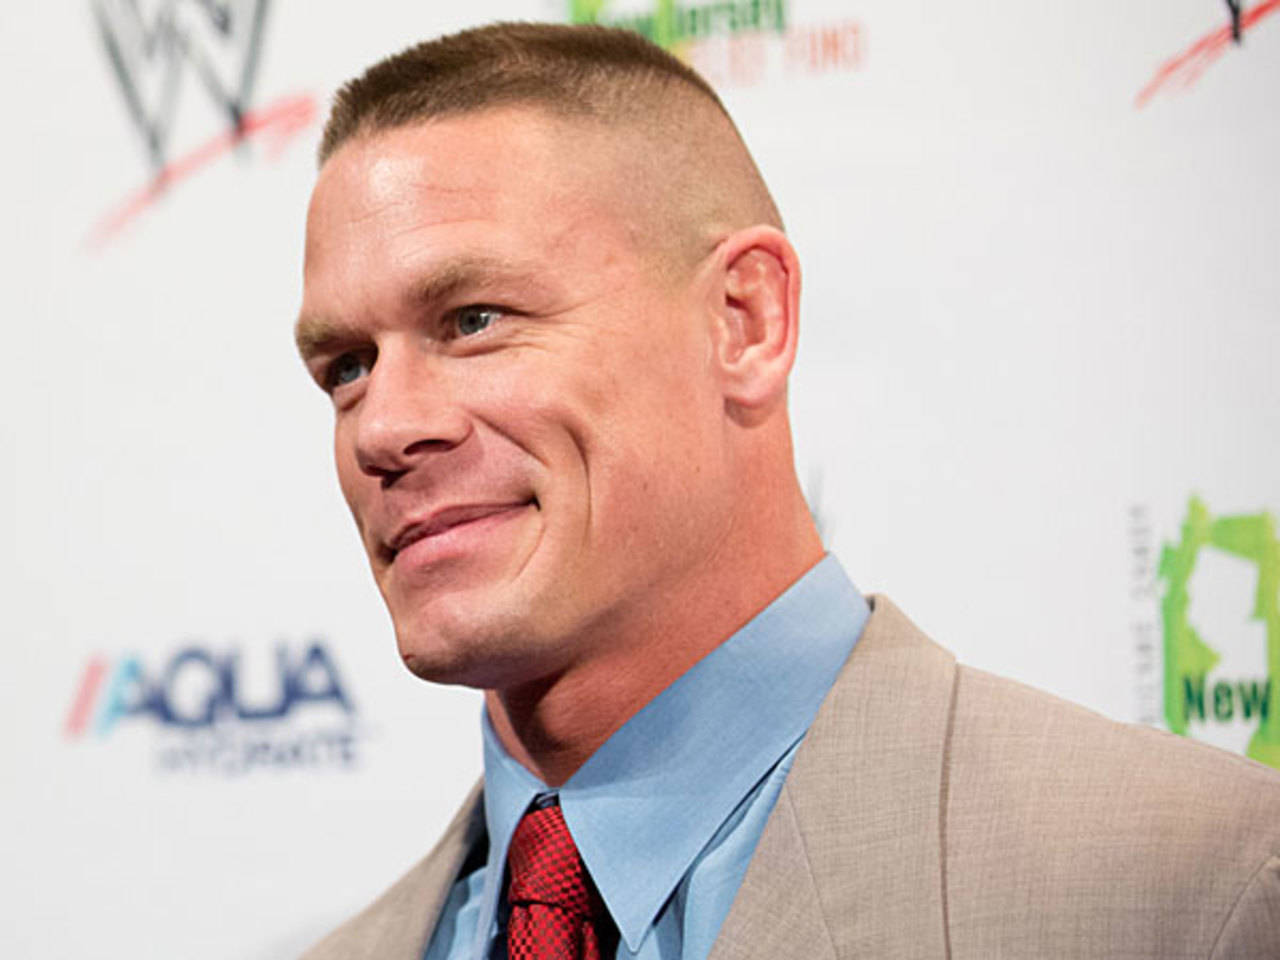 John Cena's wild 12 months: From getting engaged, ruthless WWE promos,  multiple losses and splitting with Nikki Bella - Mirror Online